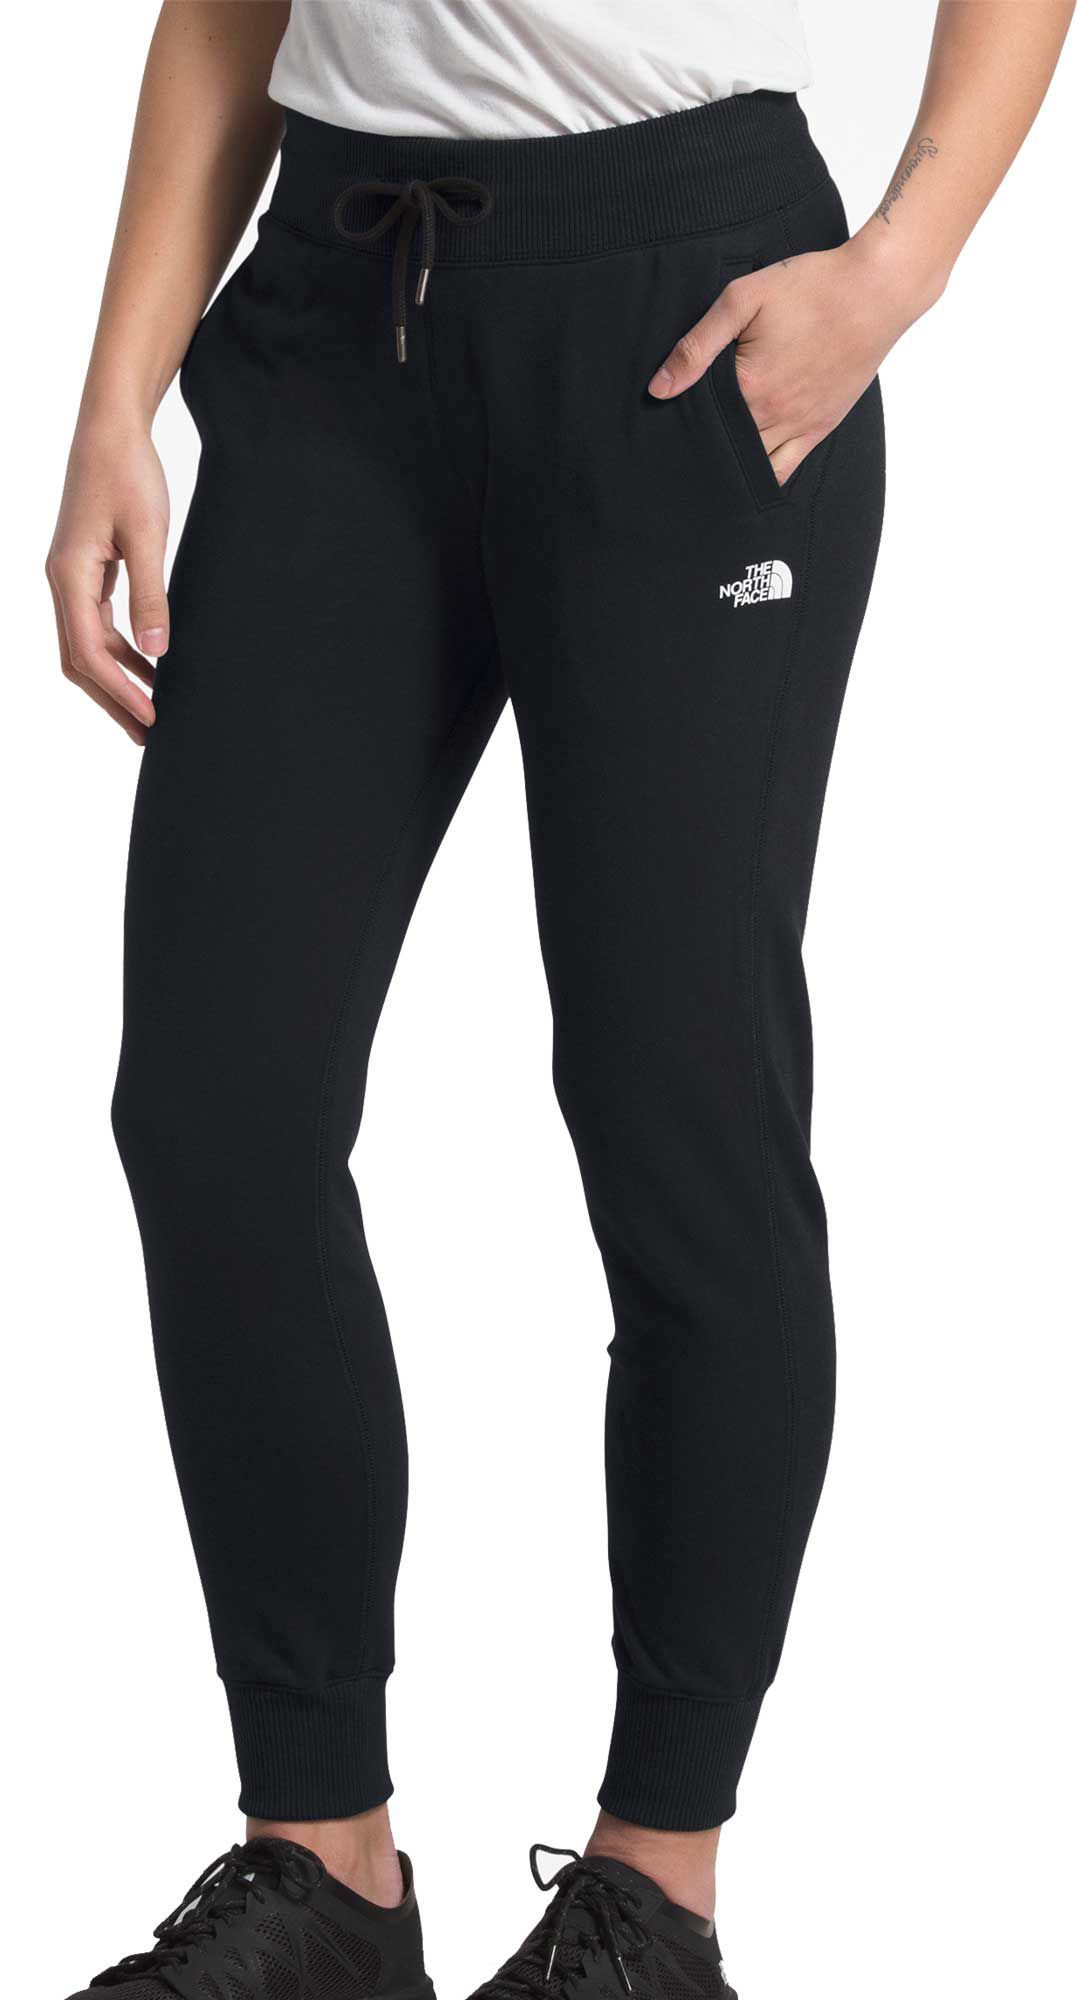 North Face Jogger Sale, 51% OFF | blountindustry.com